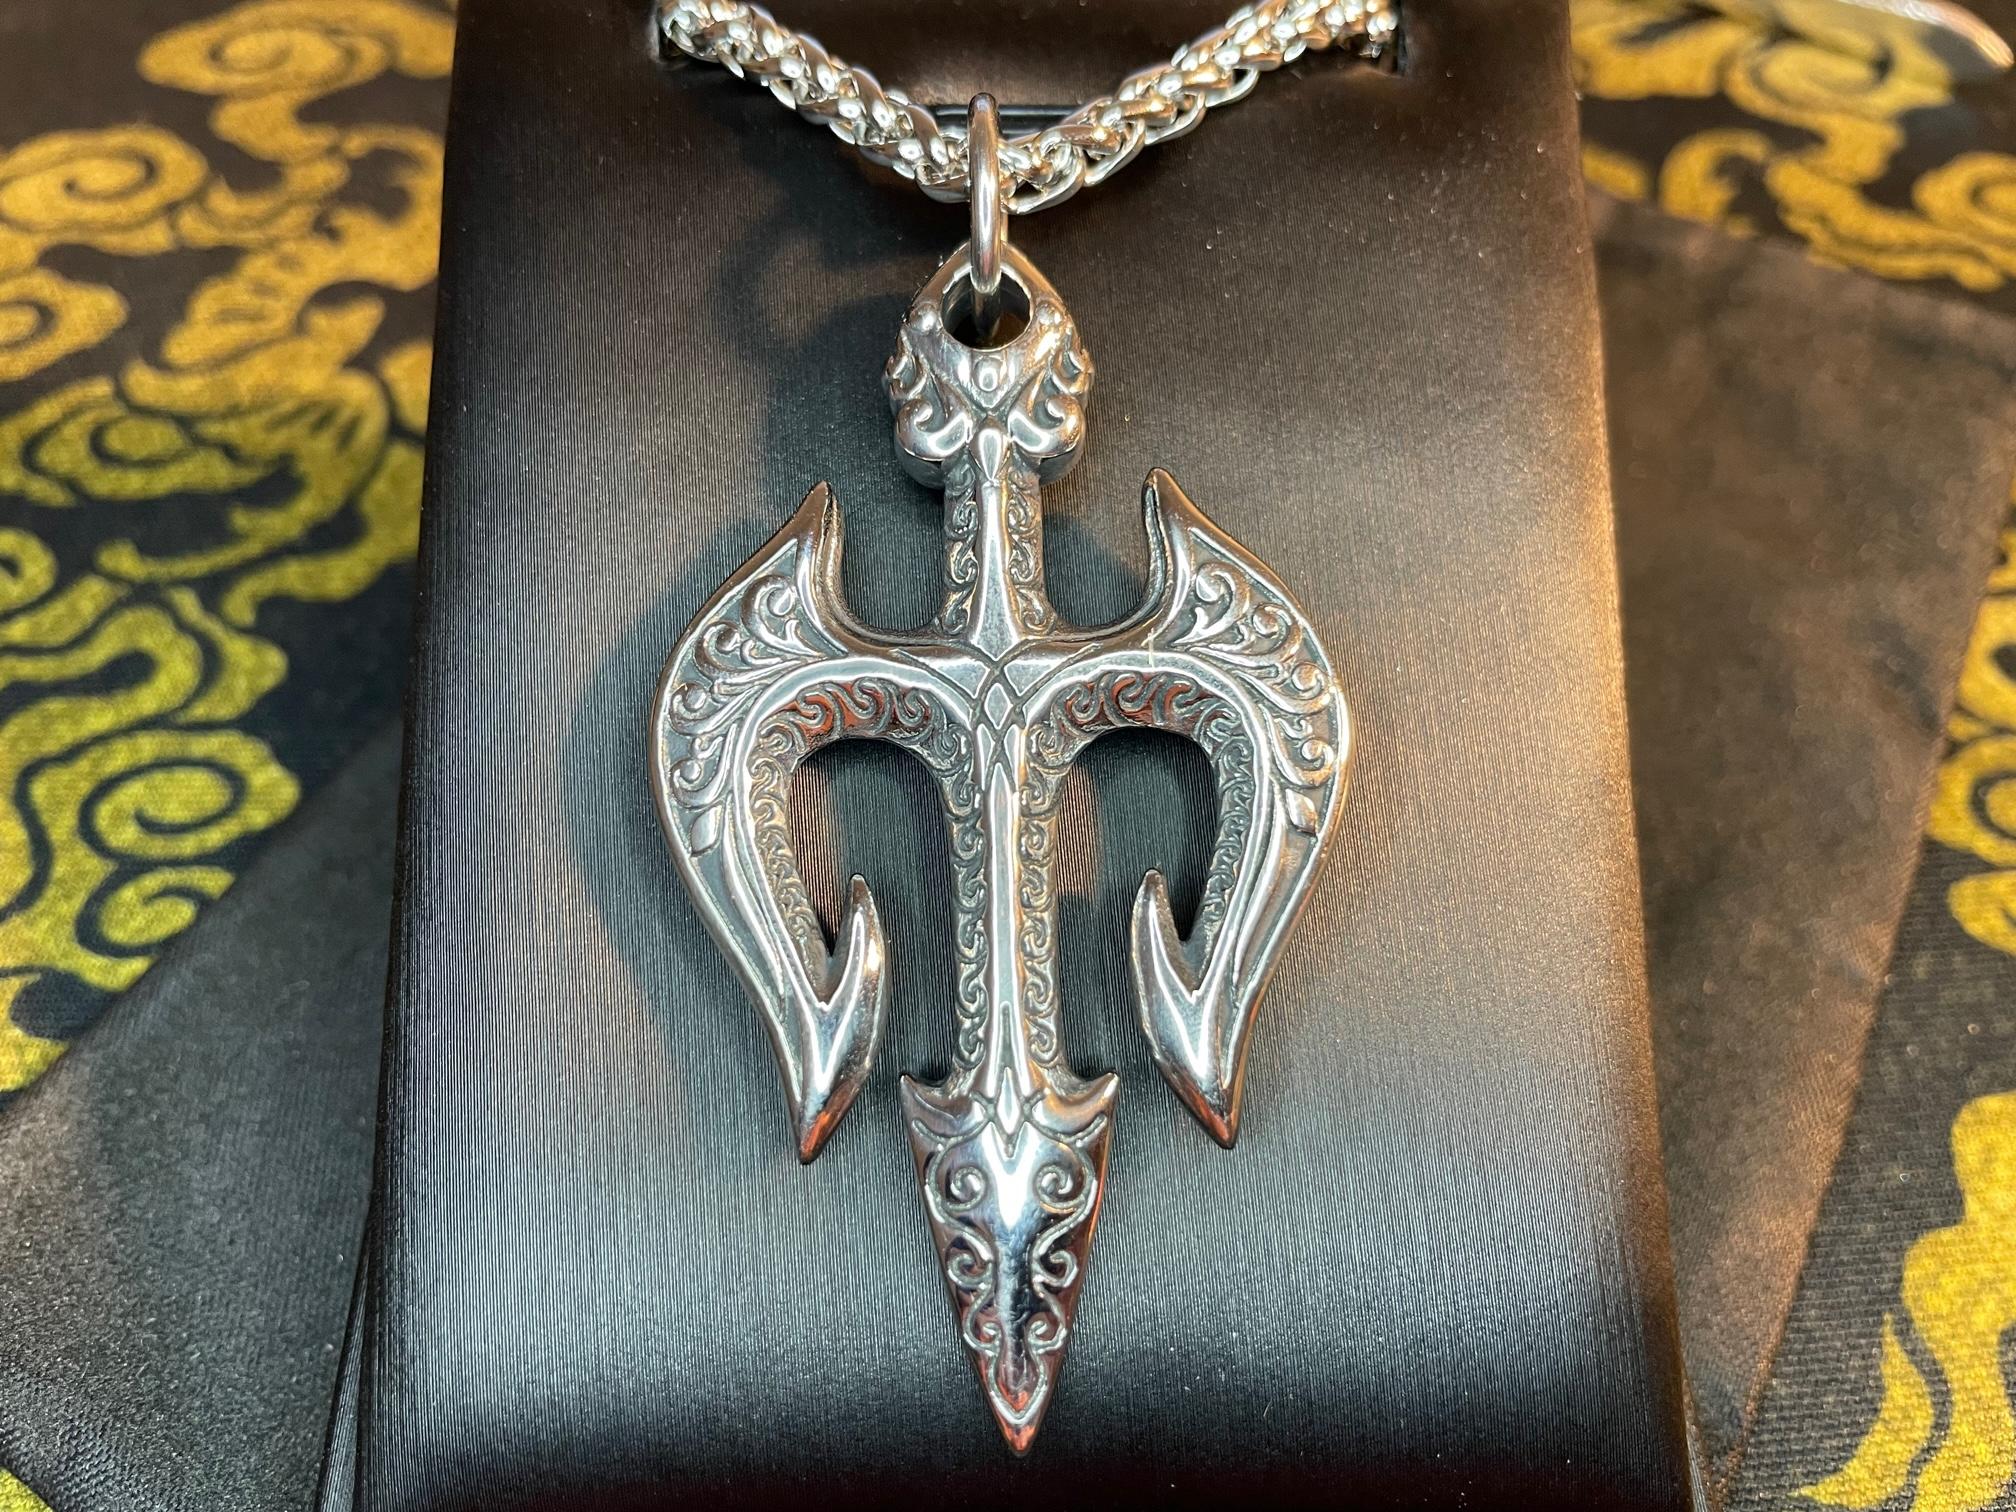 satan's pitchfork devil's fork trident tribal stainless steel pendant necklace gothic satanic wiccan occult darkness jewelry